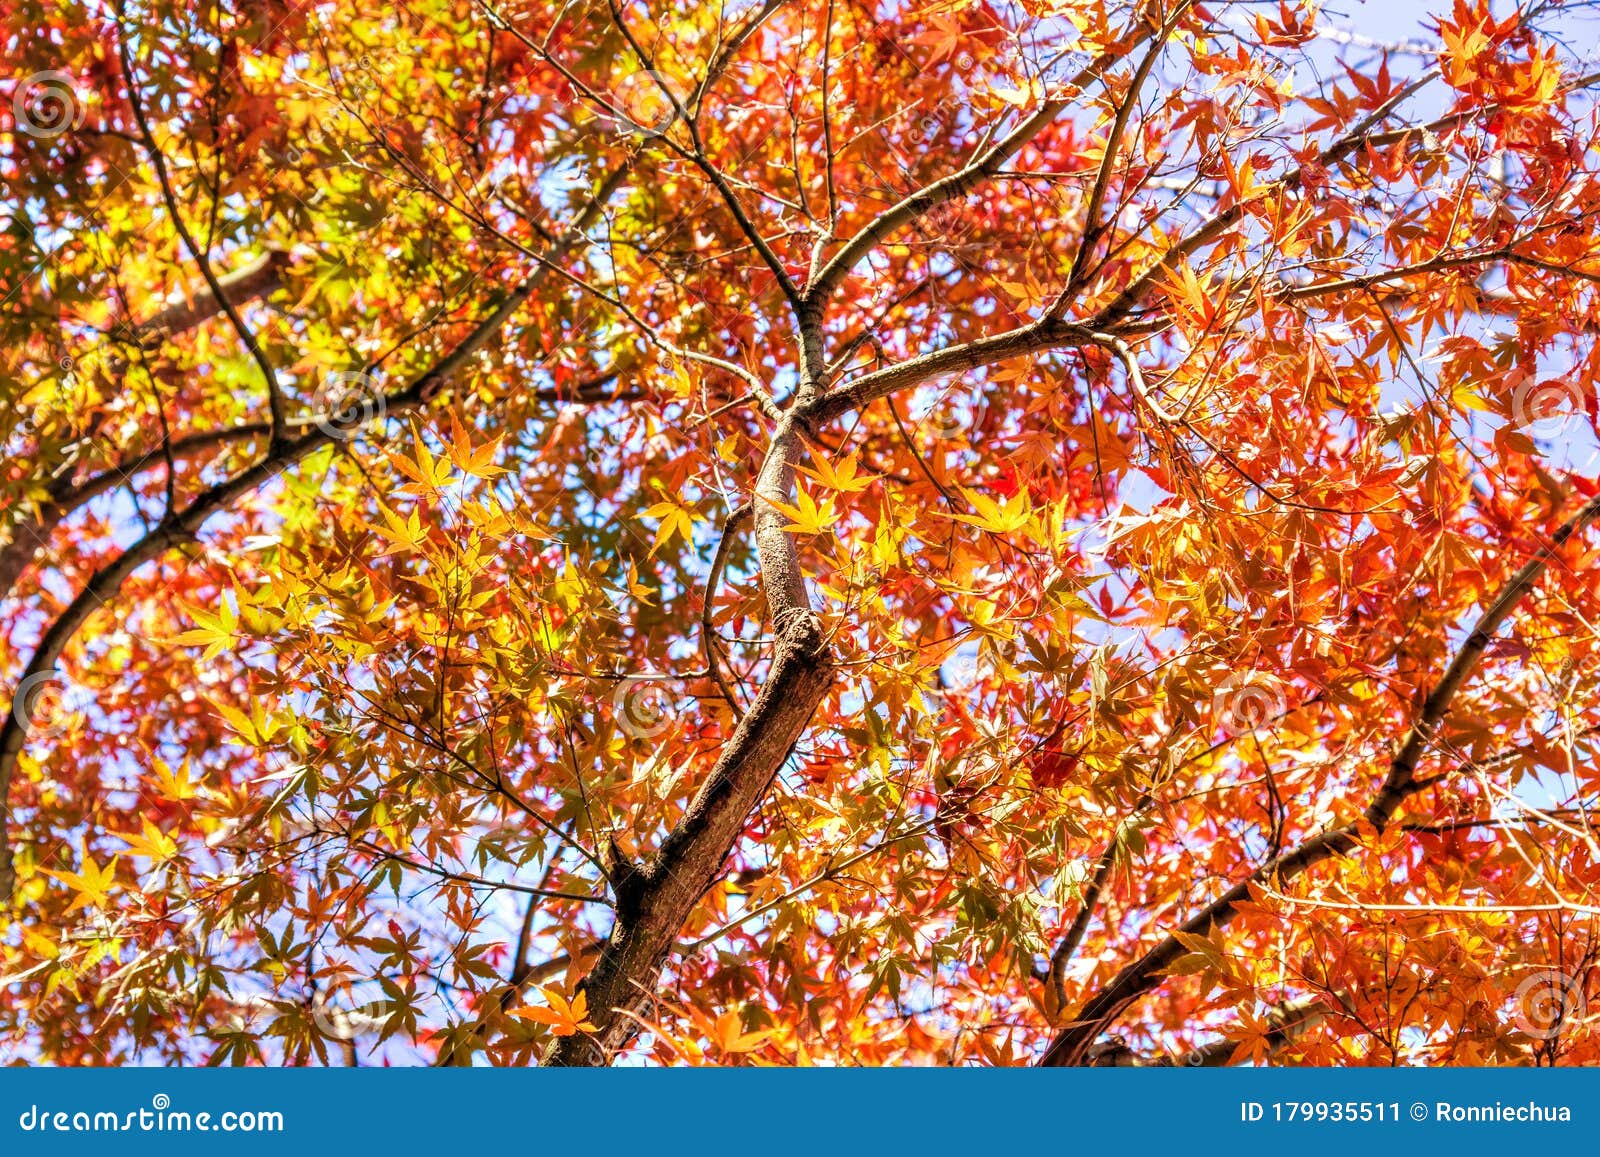 autumn tree with red and yellow maple leaves background